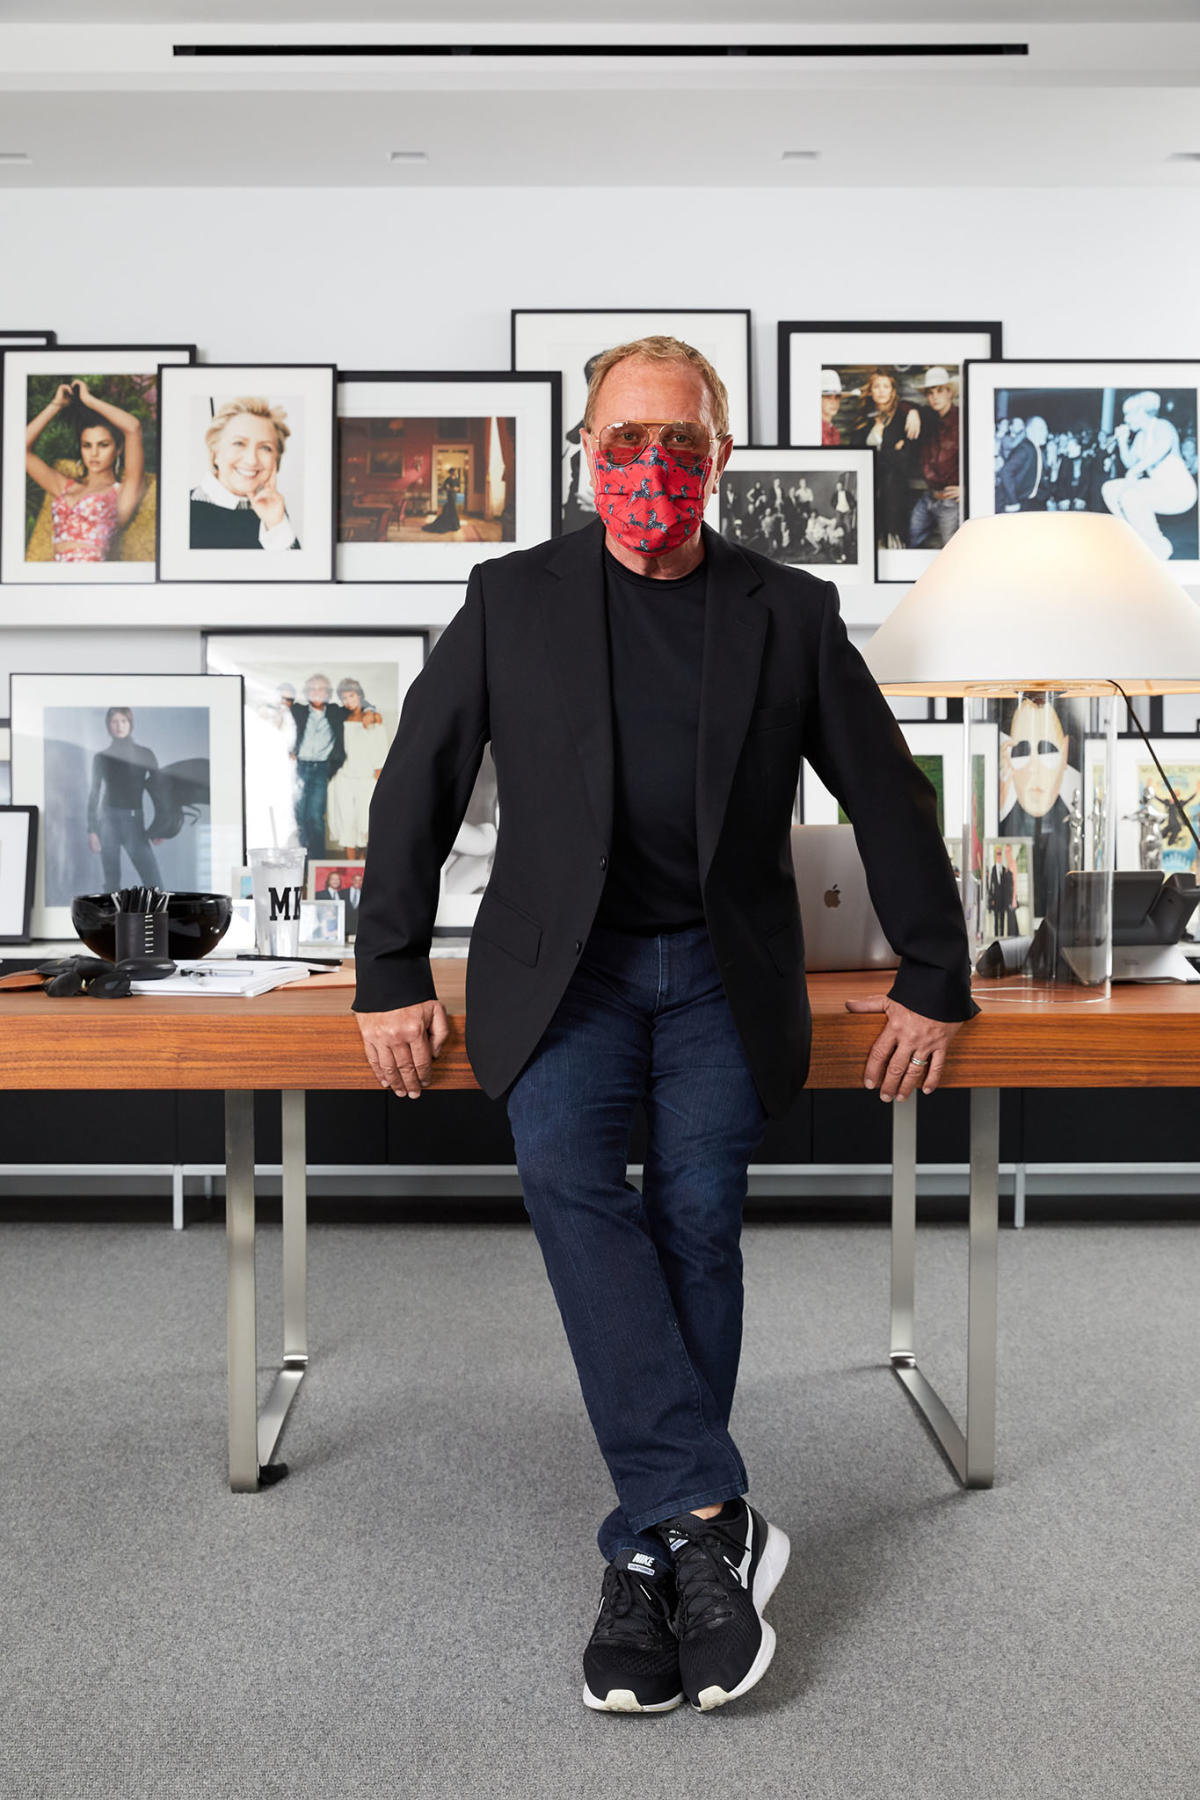 Bridget Foley's Diary: Michael Kors, Masked and Working